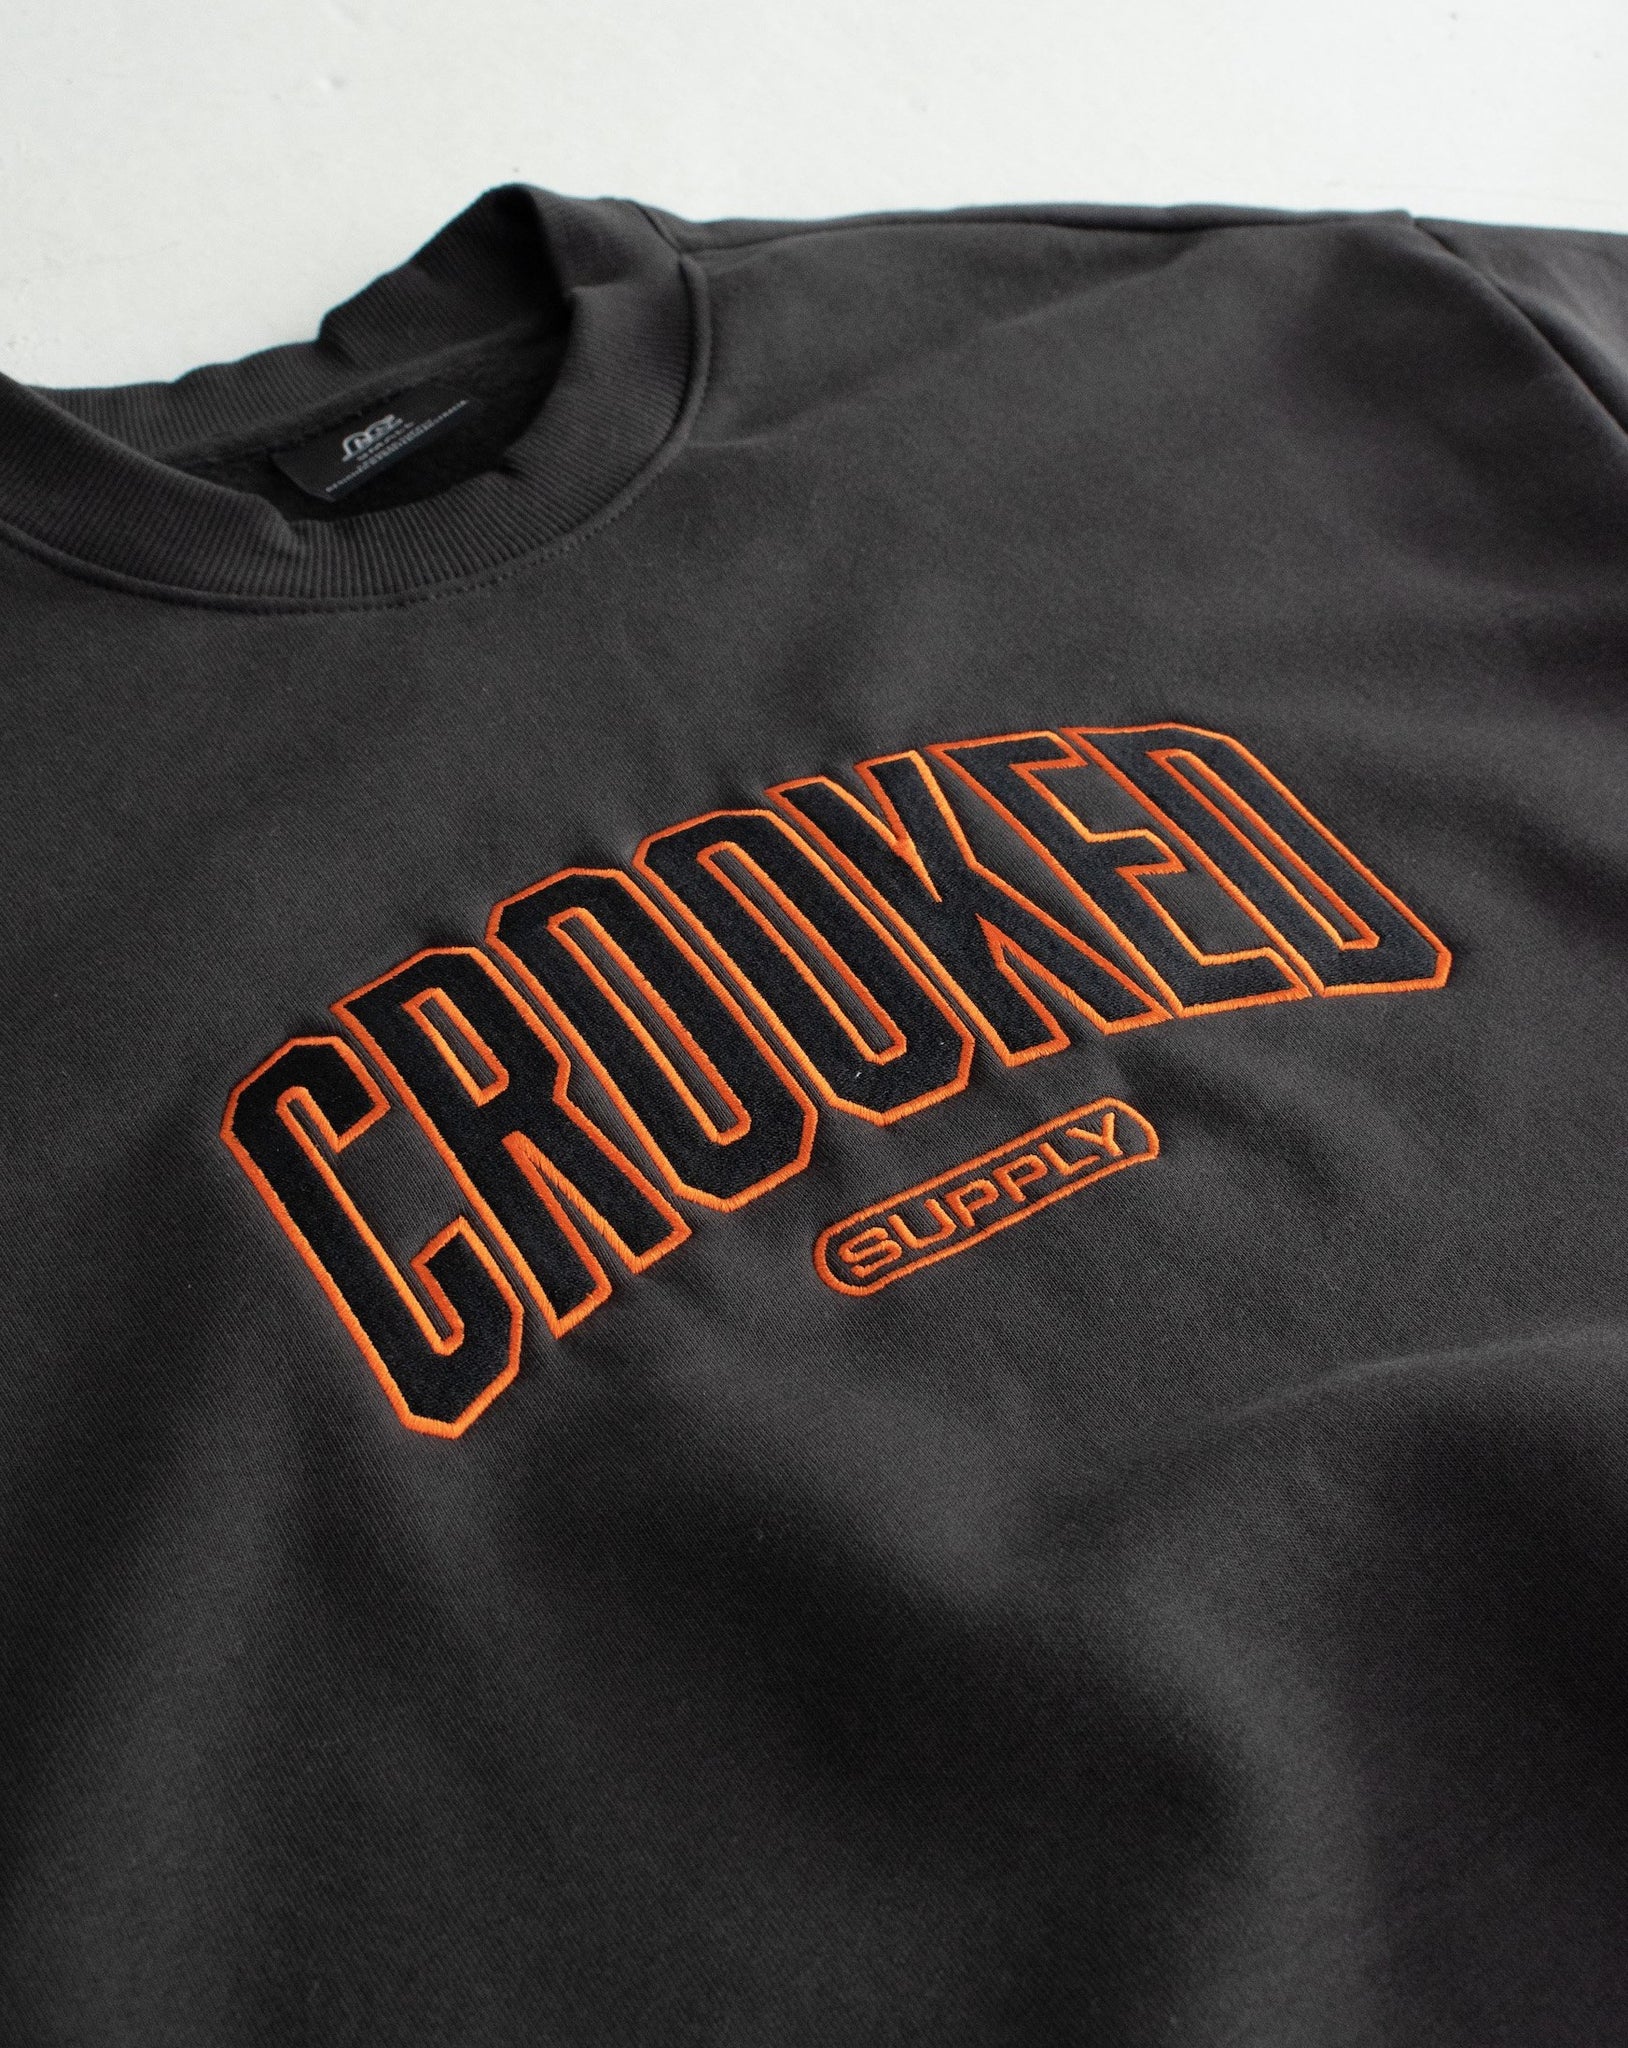 Statement Crew (Embroidered Logo) - Charcoal